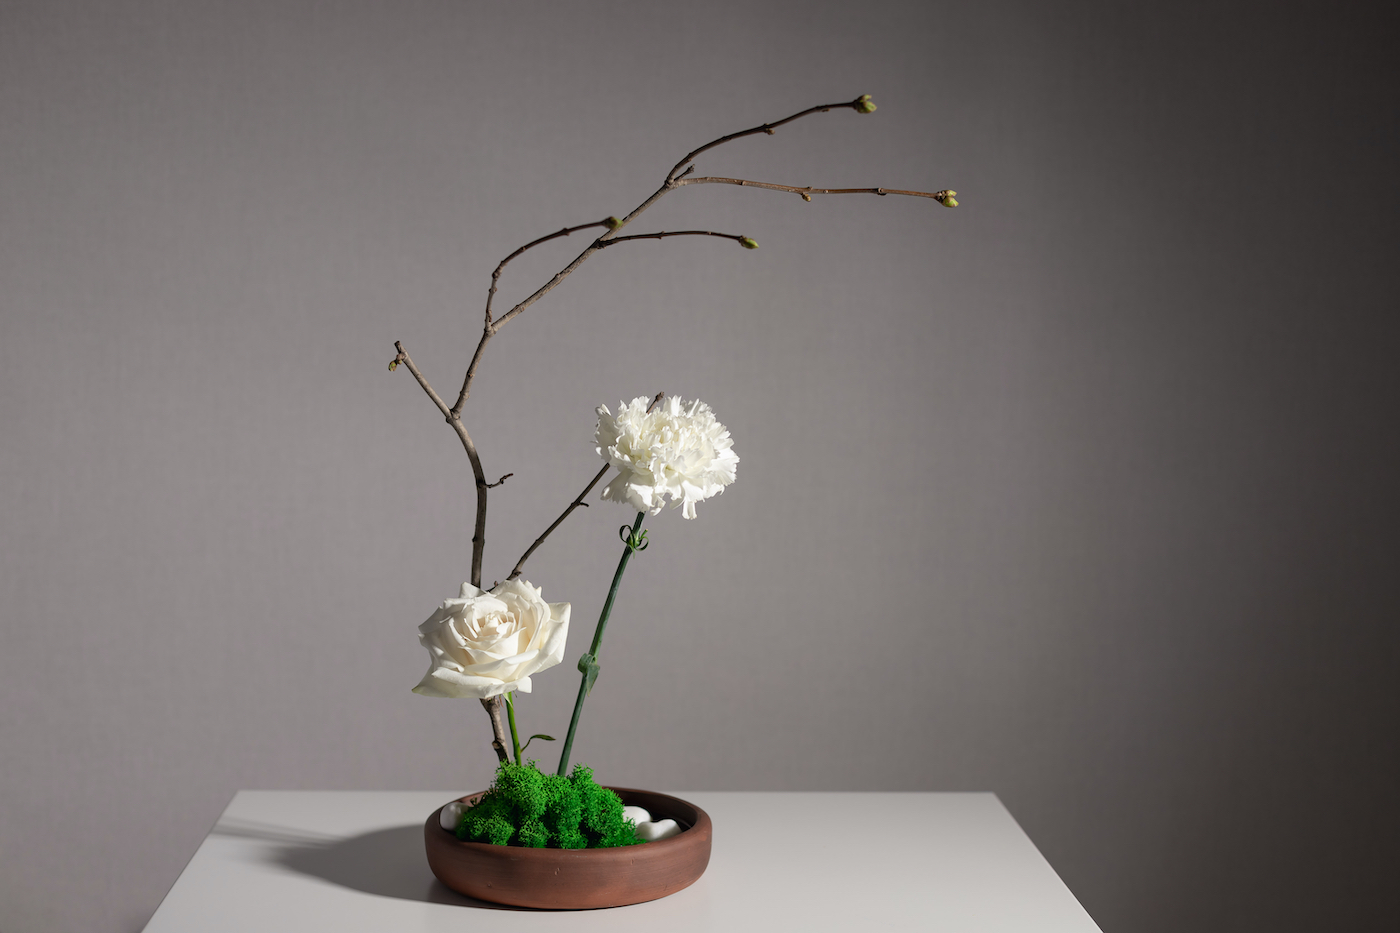 Flower arrangement of white carnation, rose, and tree branches in a ceramic vase with stones and moss. Japanese Ikebana style. gray background